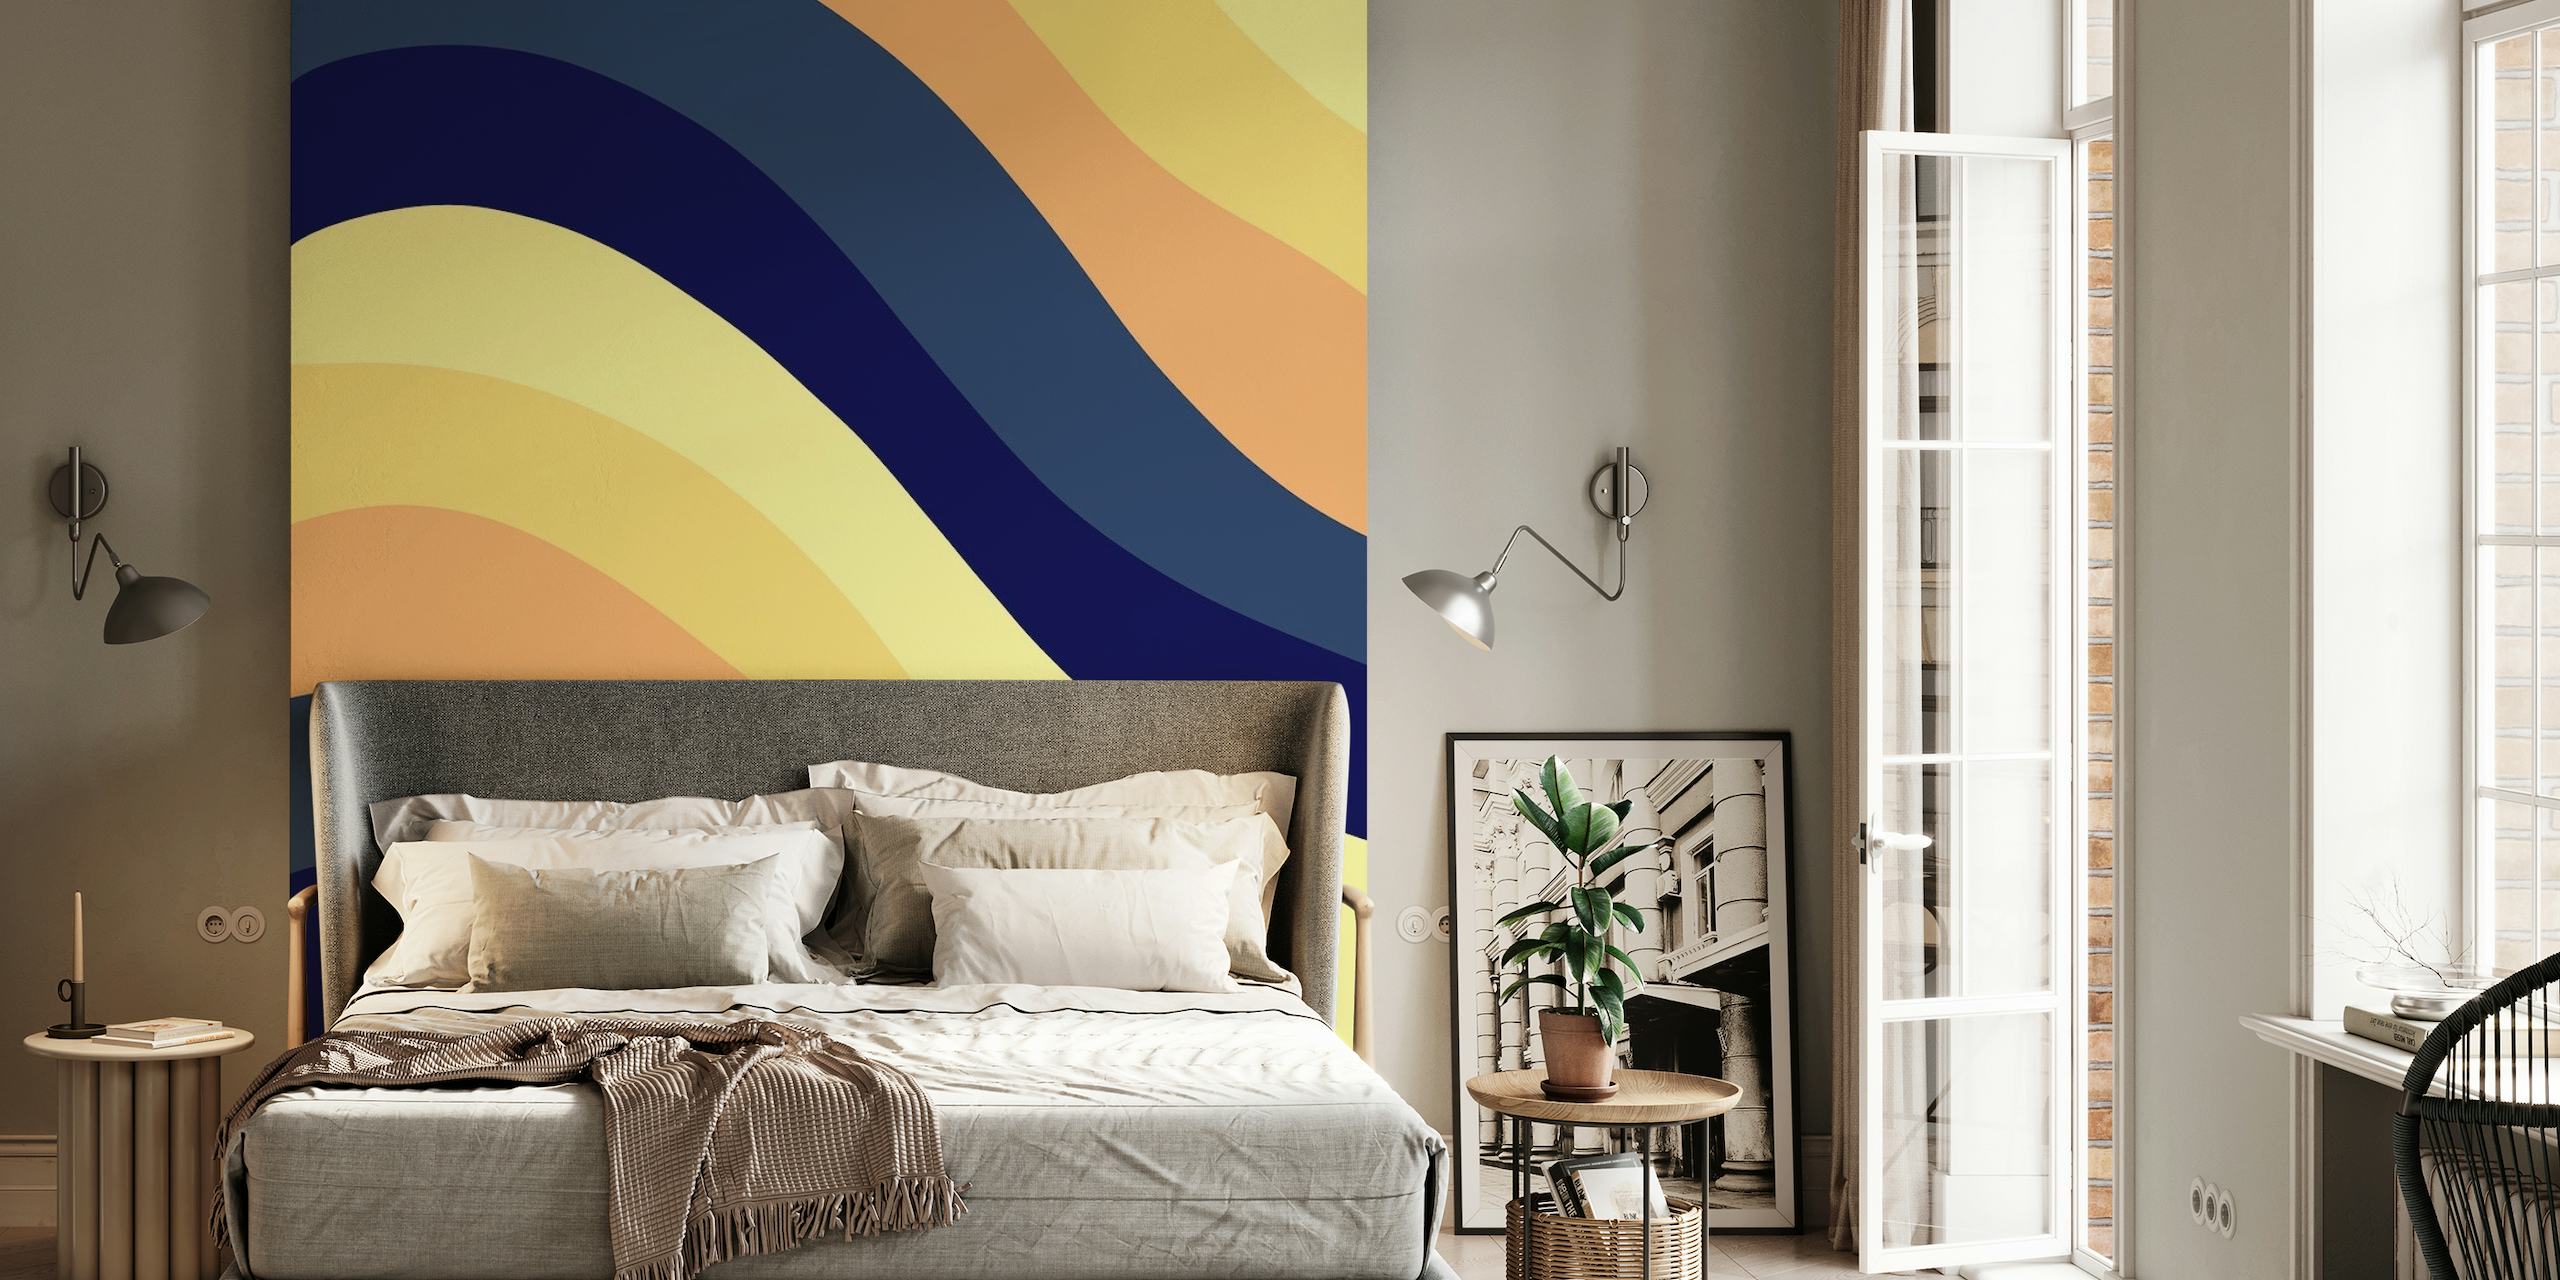 Abstract navy blue, yellow, and orange waves wall mural design